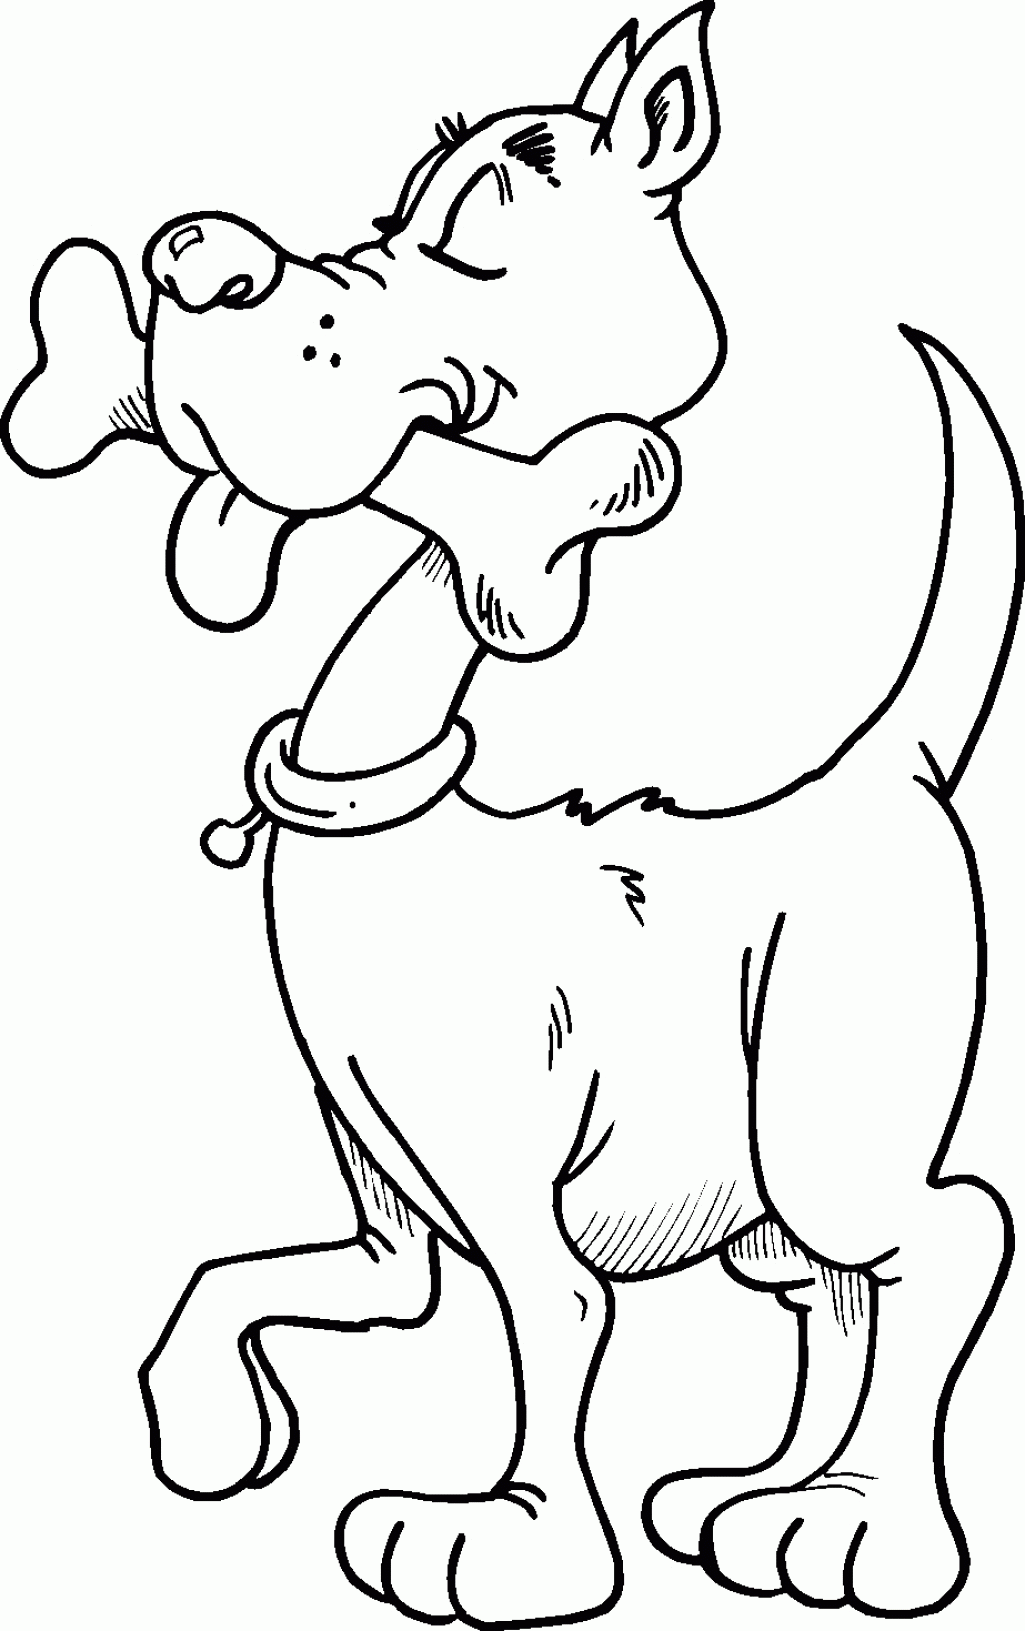 Anime Animals Coloring Pages - Coloring Home